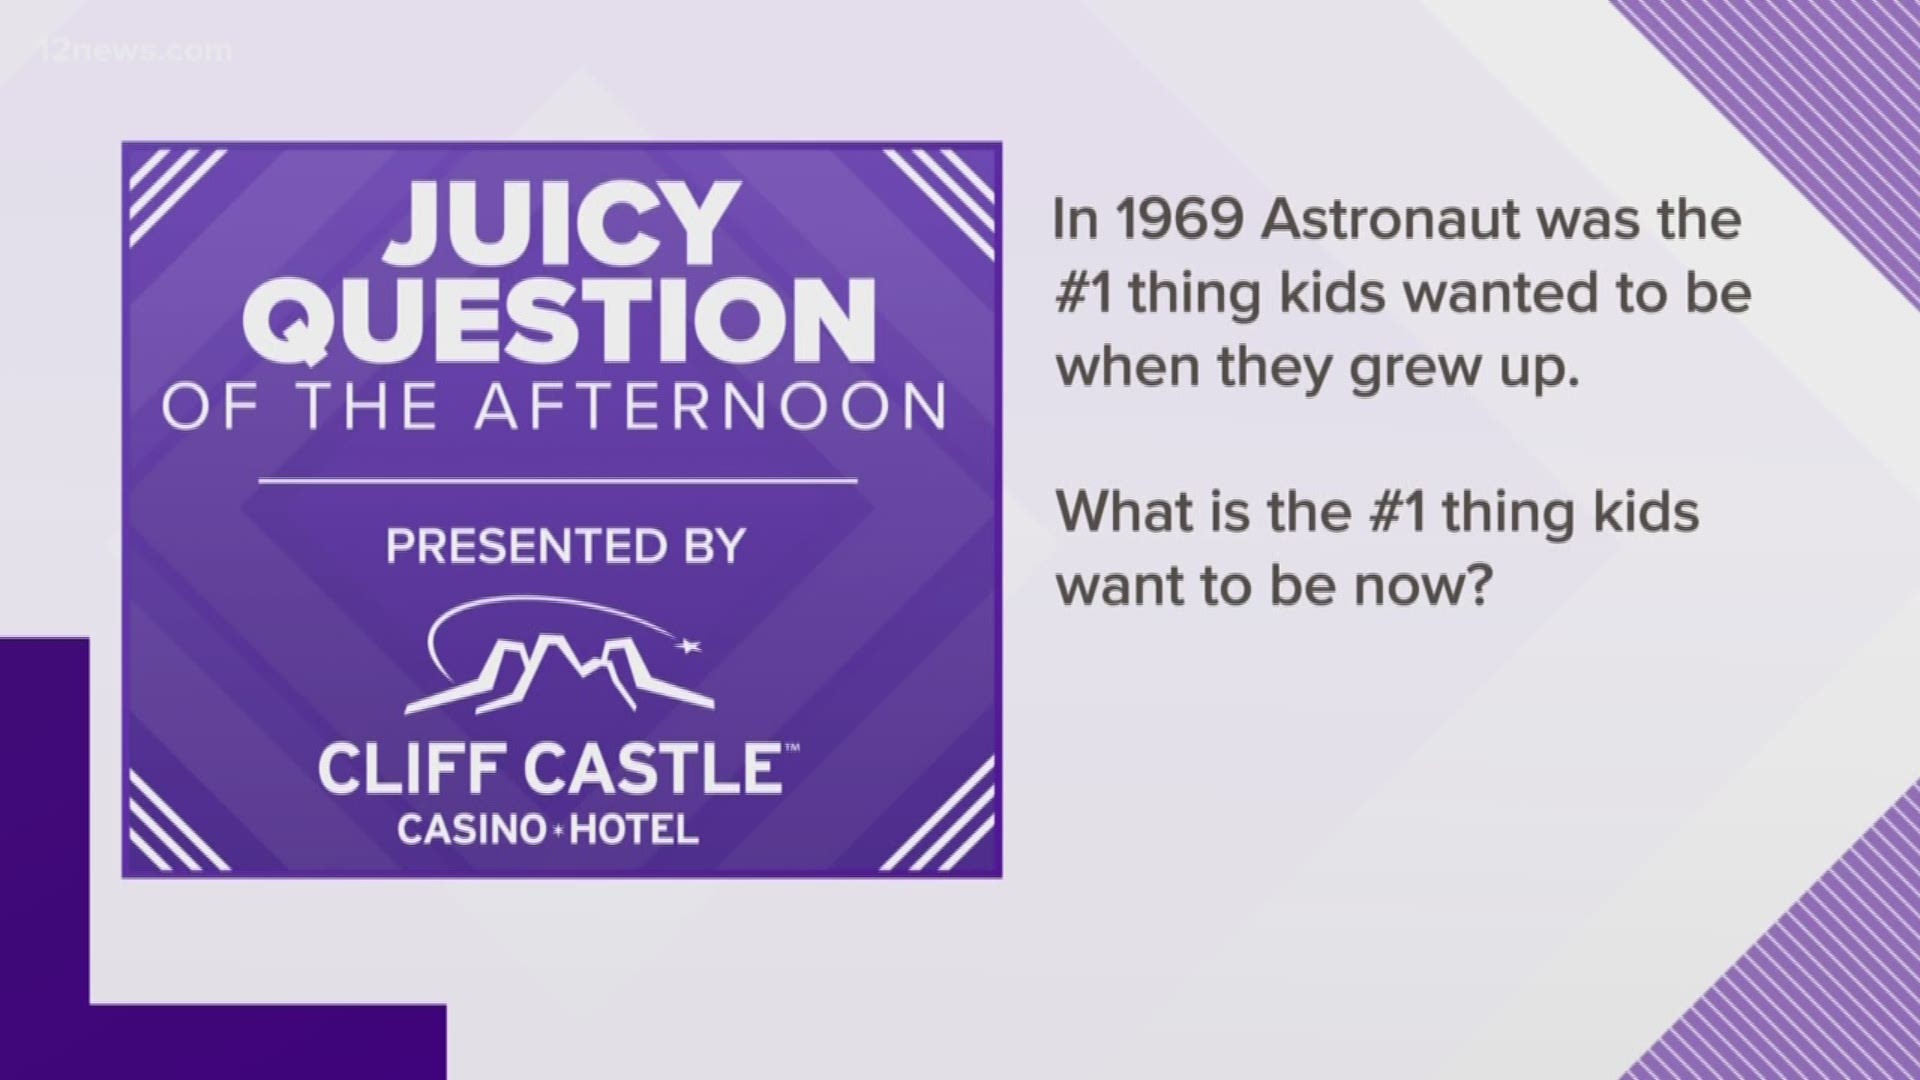 In 1969, an astronaut was the number one thing kids wanted to be when they grew up. THIS is the number one thing kids want to be now. What is it?